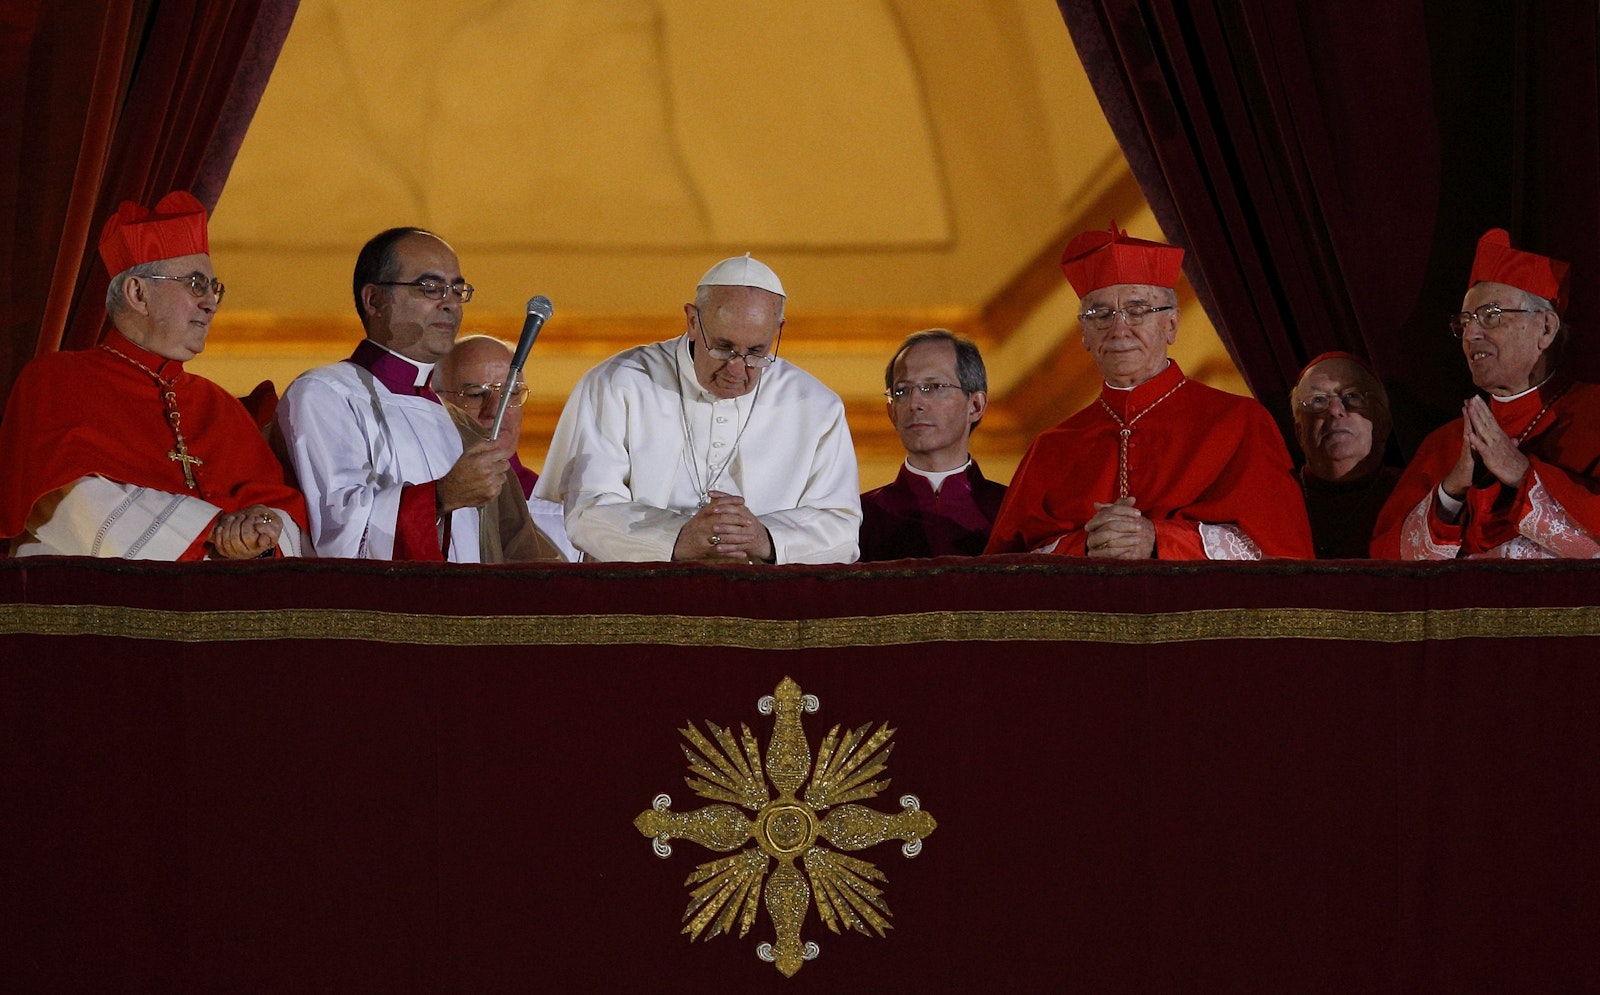 Pope Francis bows his head in prayer during his election night appearance on the central balcony of St. Peter's Basilica at the Vatican on March 13, 2013. Cardinal Jorge Bergoglio's choice of the name "Francis" reflected his devotion to St. Francis of Assisi and served as an early signal of his spirituality and style as his papacy began. (CNS photo/Paul Haring)